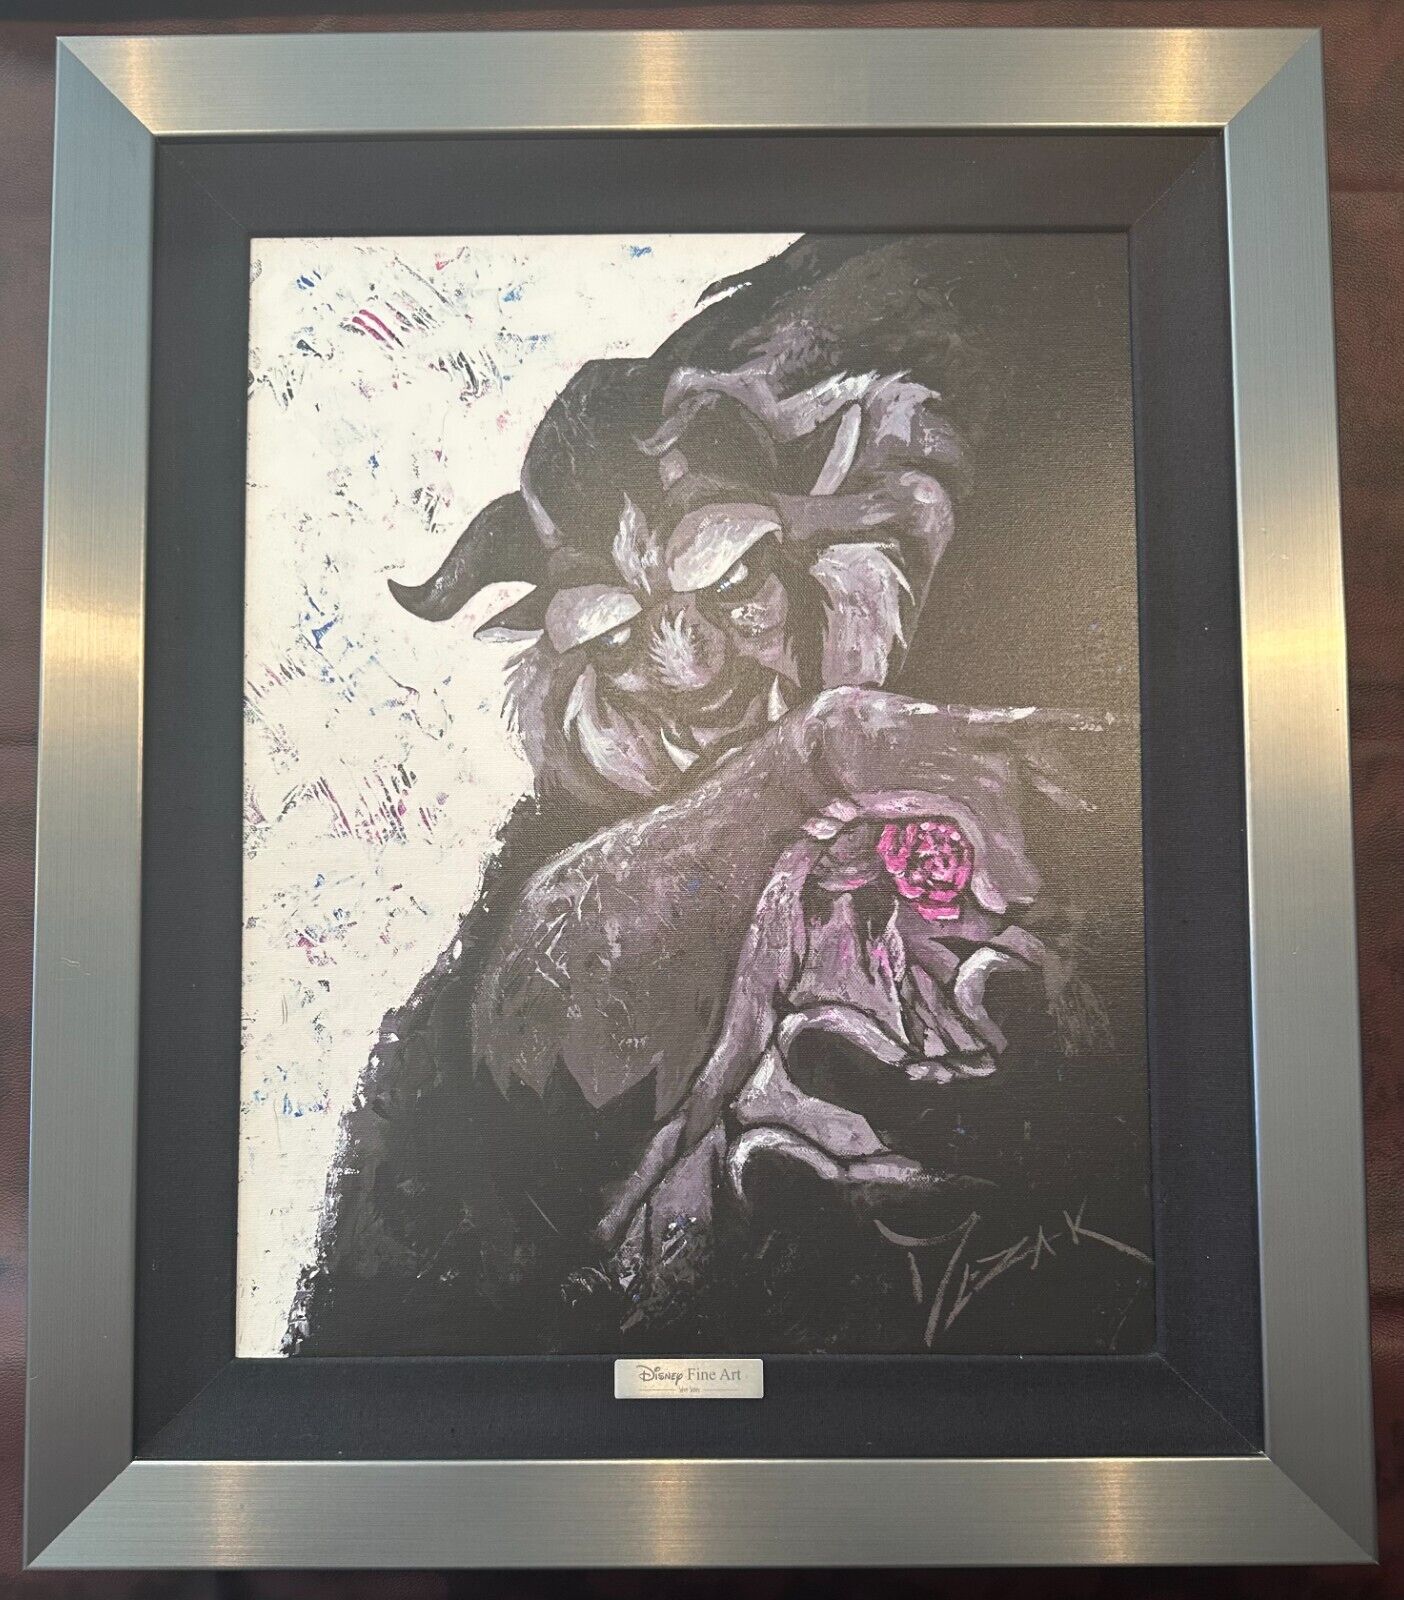 DISNEY FINE ART - SILVER SERIES - LIMITED EDITION - BEAUTY & THE BEAST